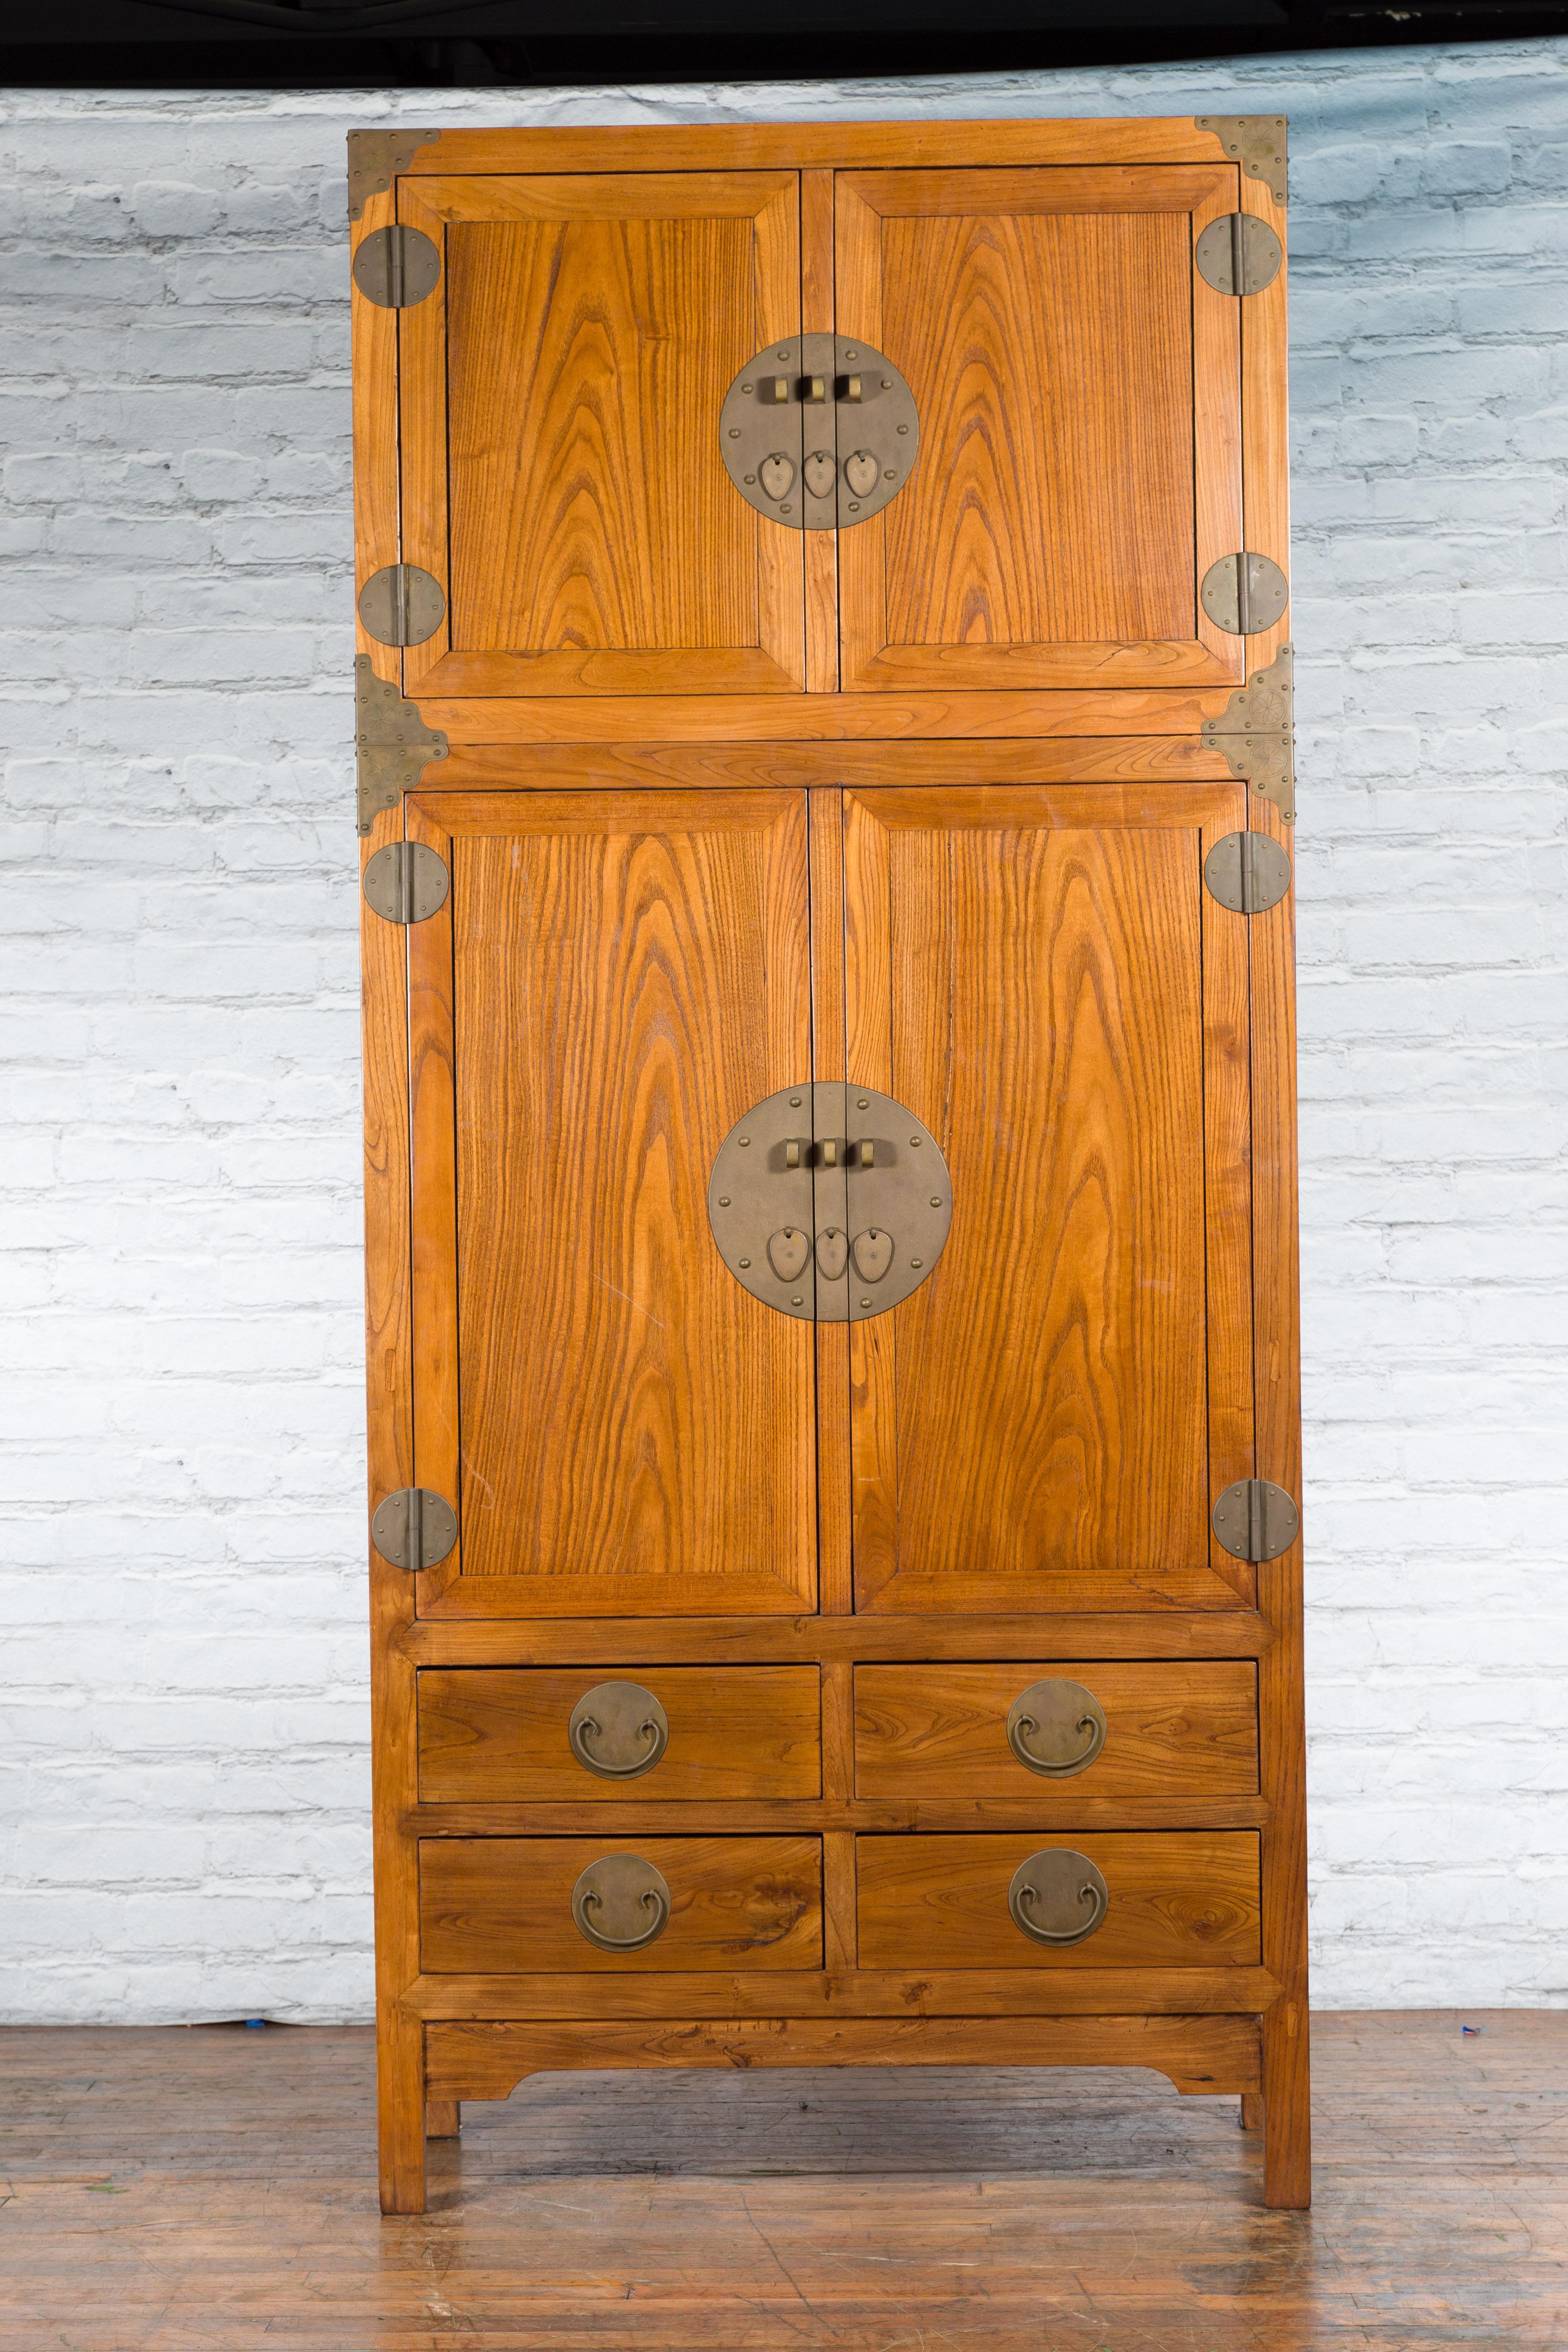 A tall Chinese Qing Dynasty period compound cabinet from the early 19th century made of oakwood and adorned with brass hardware. Created in China during the early years of the 19th century, this large compound wardrobe features a small upper cabinet